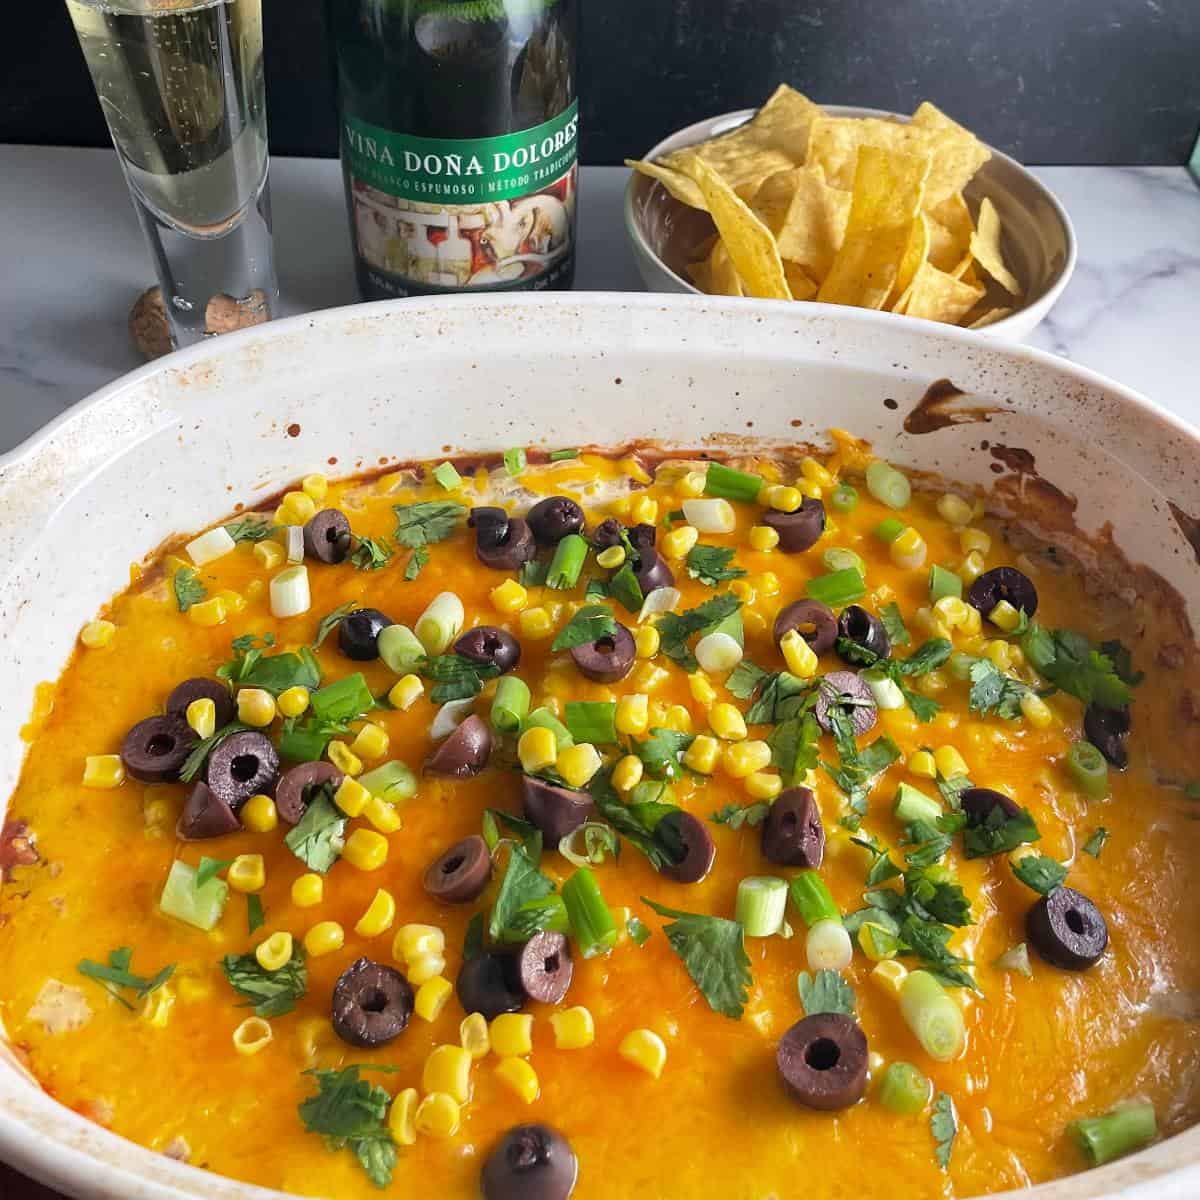 baked fiesta dip in a white baking dish, served with sparkling wine from Mexico.